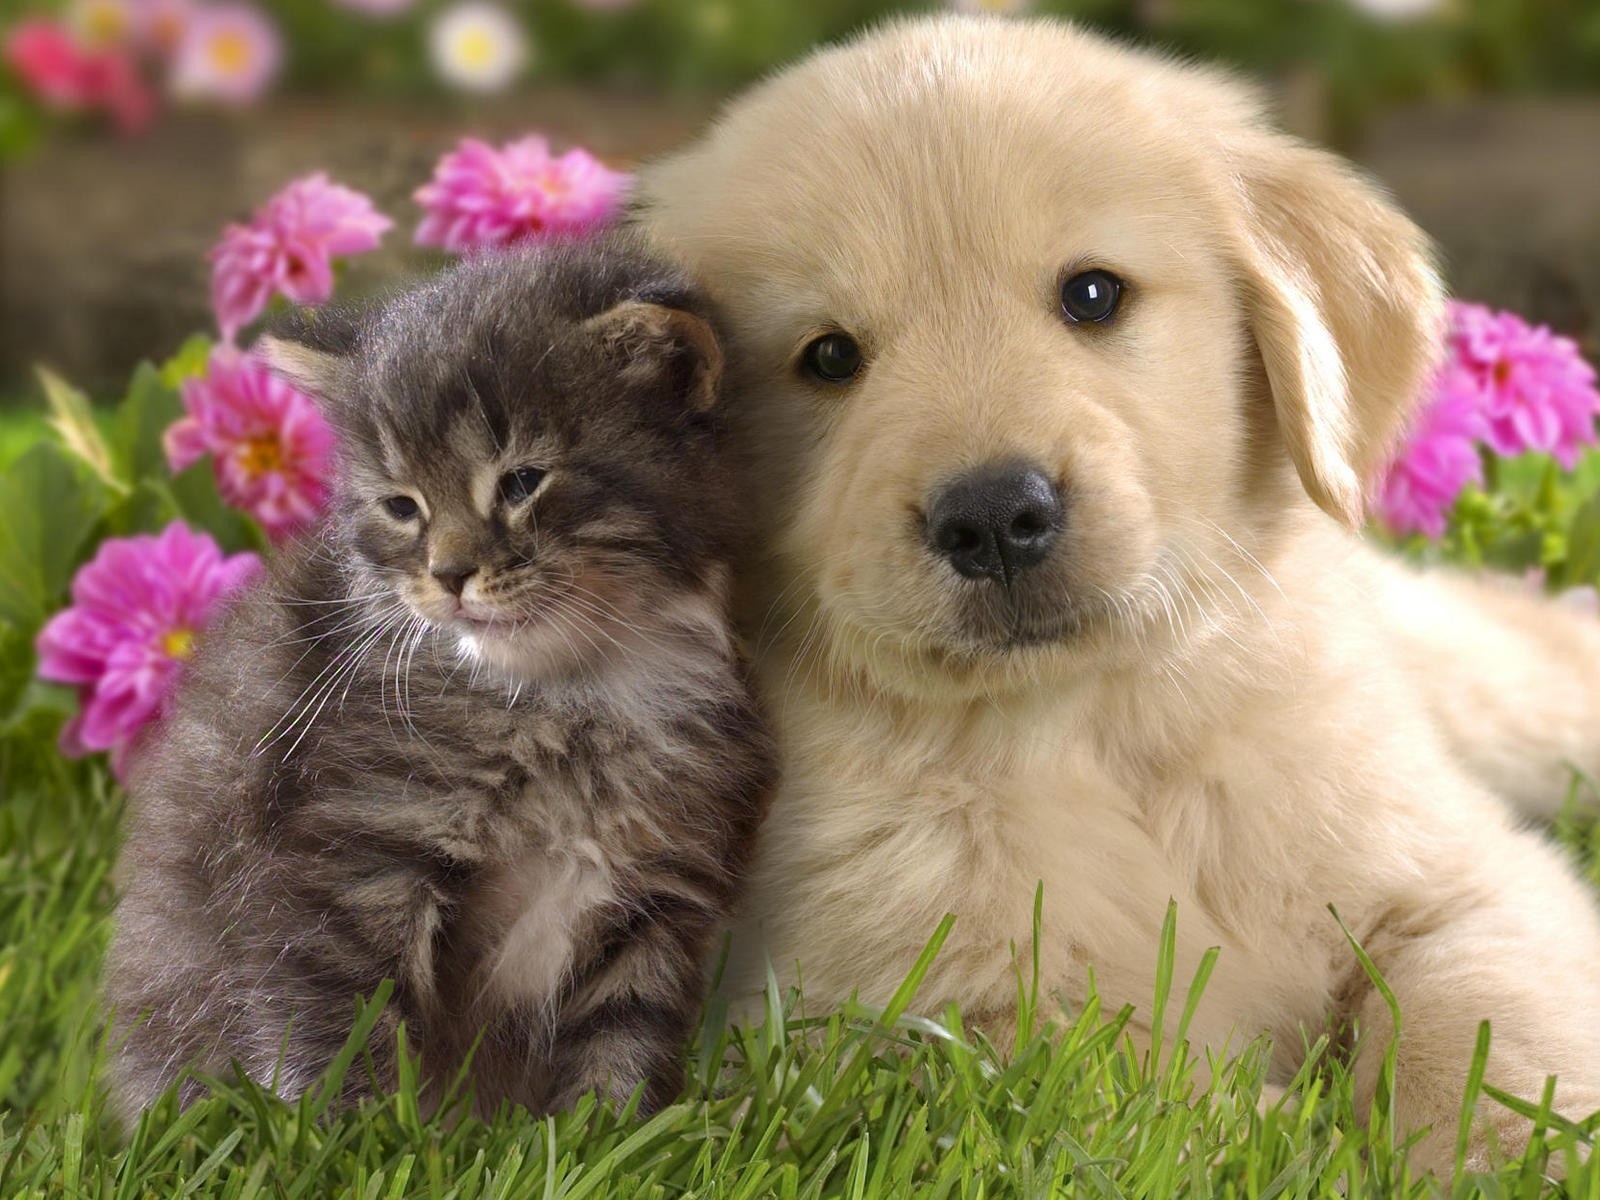 Cute Kitten And Puppy Wallpaper In Resolution